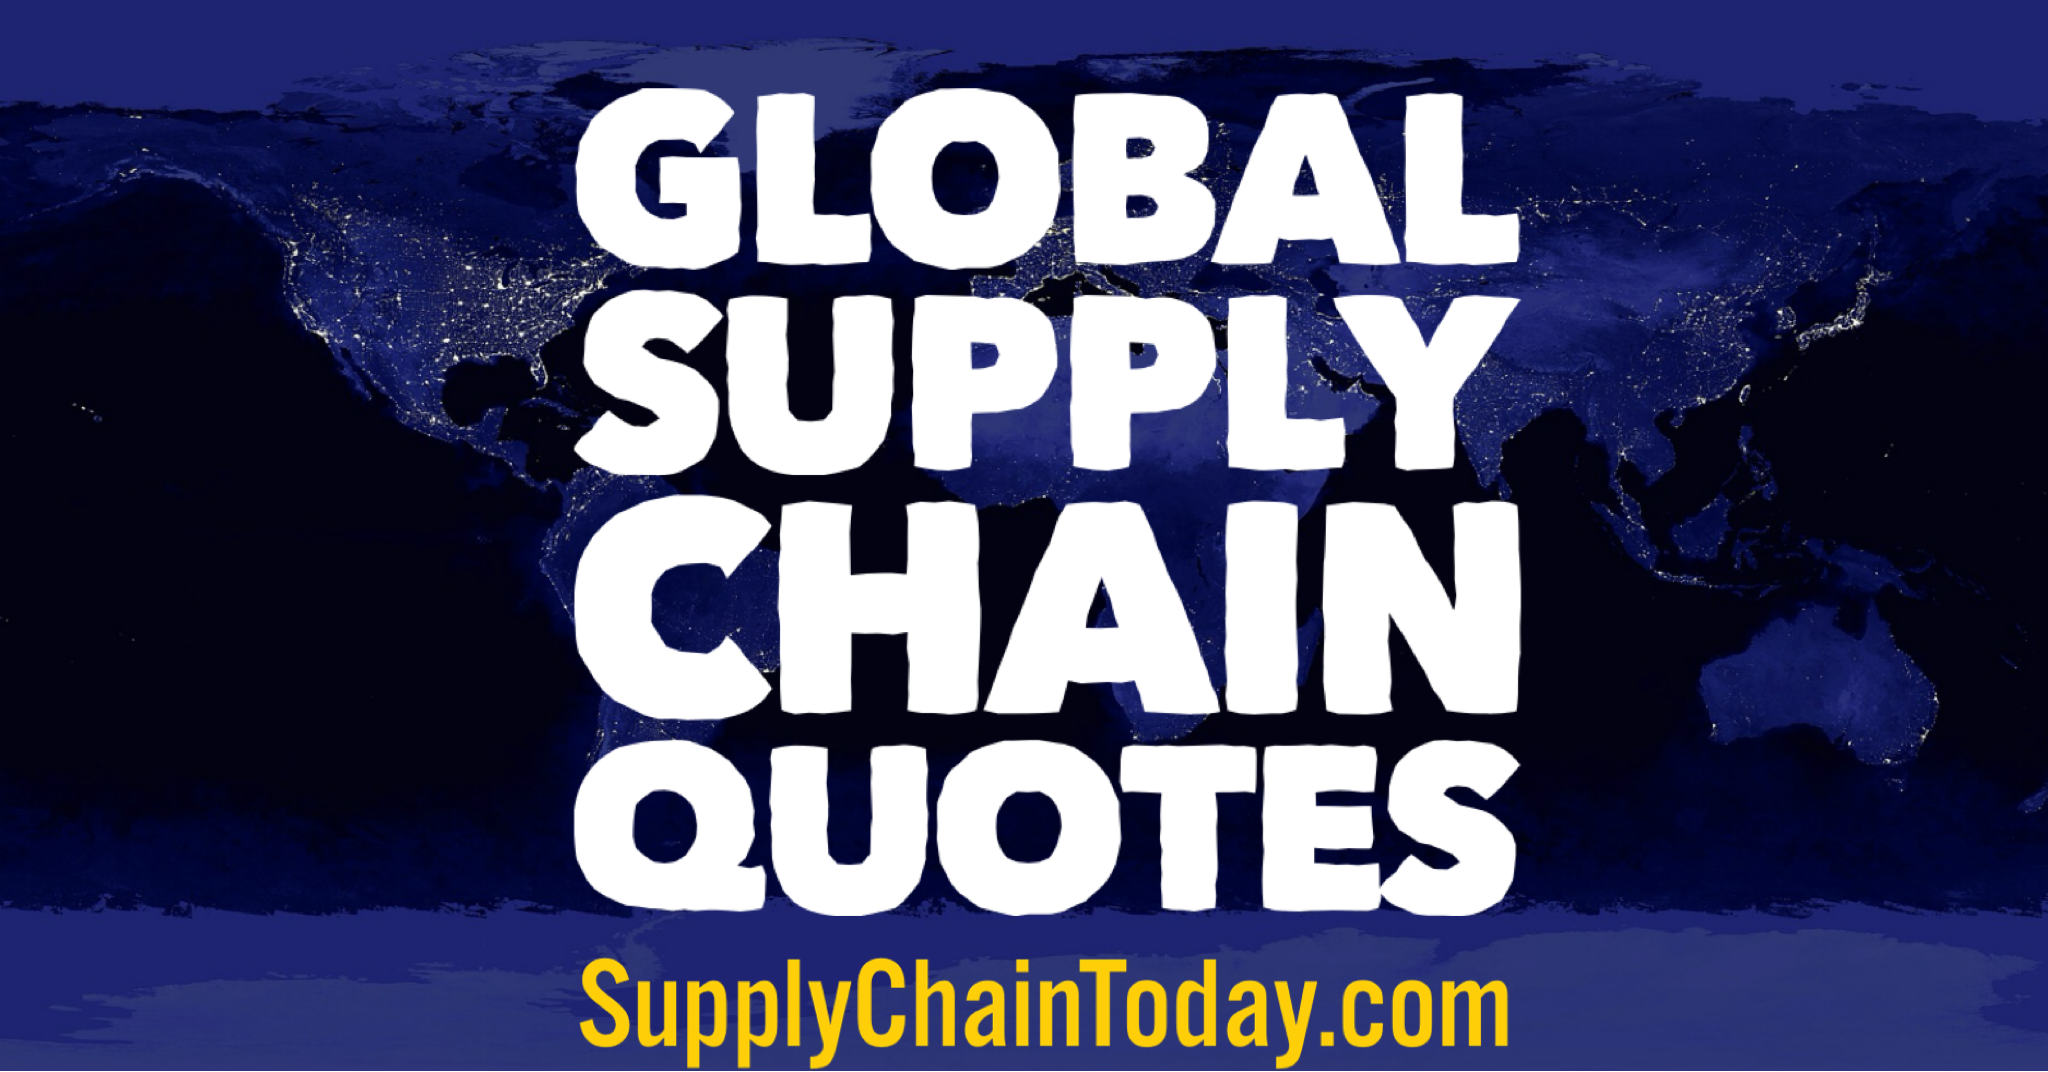 Global supply chain quotes